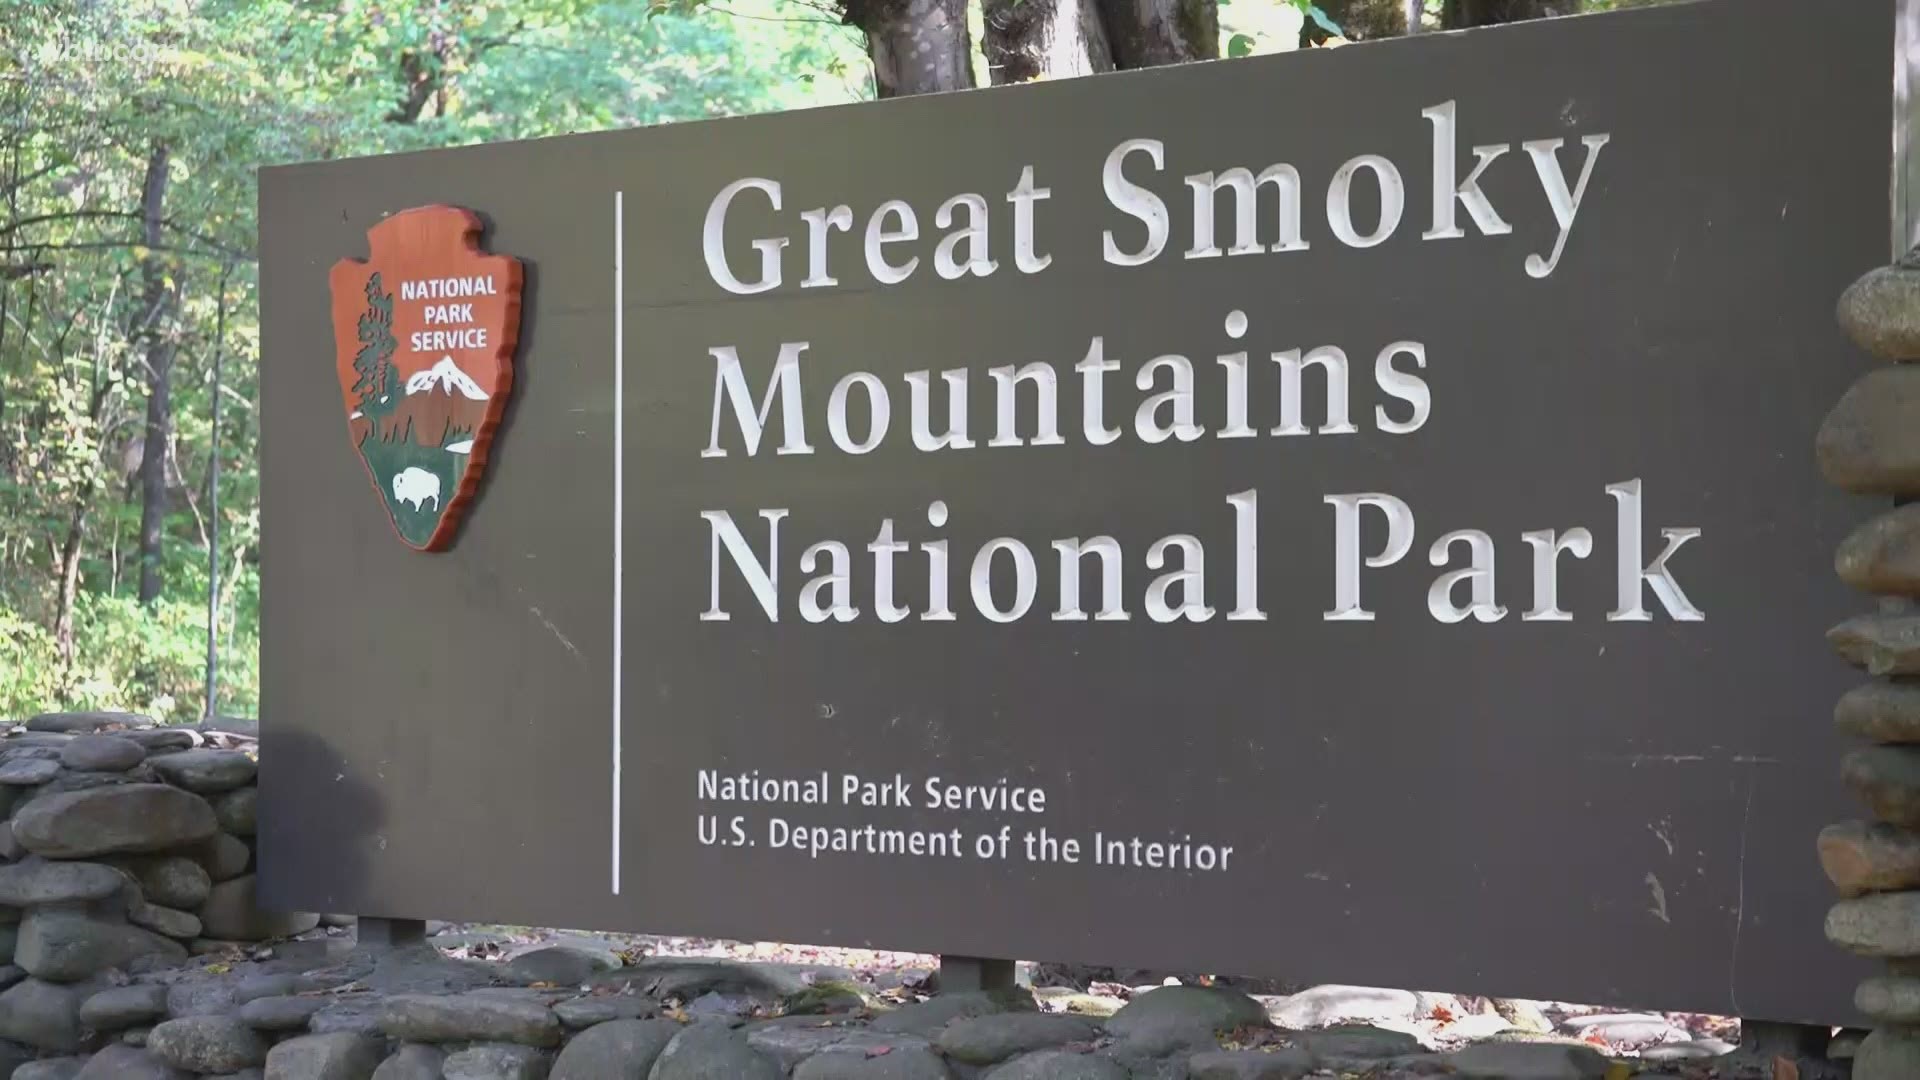 An Alabama man is dead after falling 50 feet in the Great Smoky Mountains National Park.